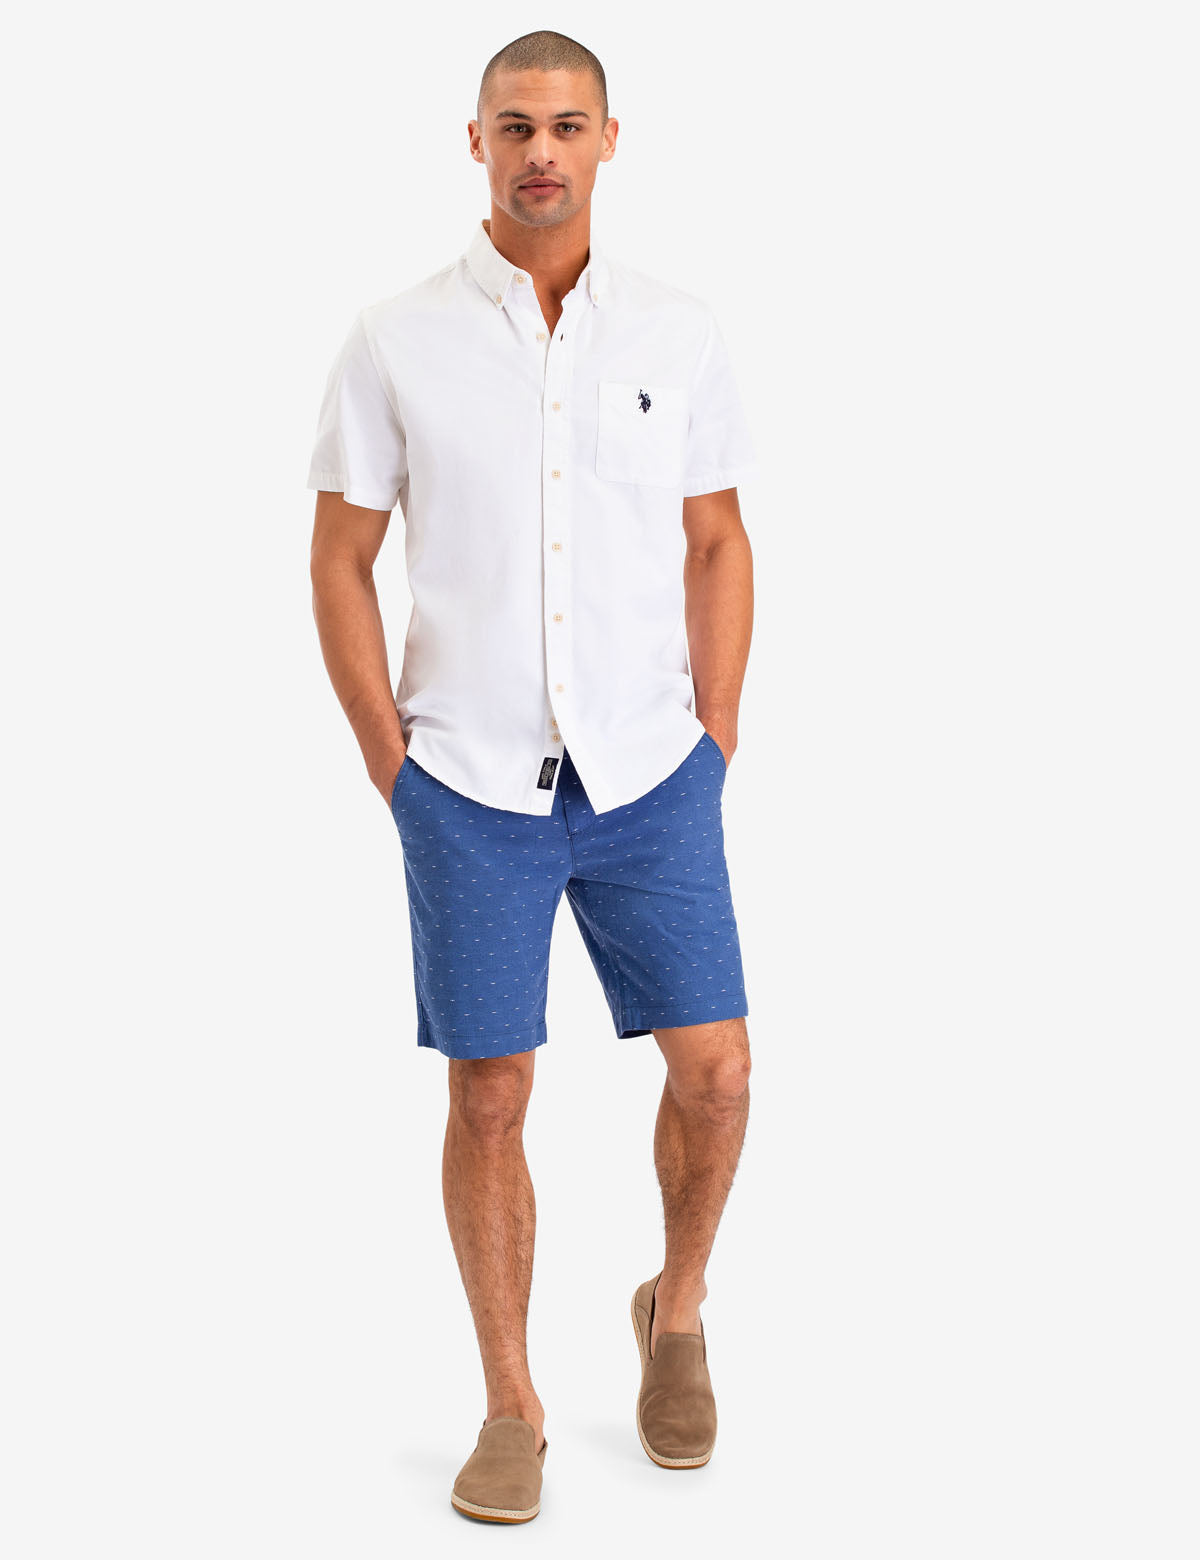 polo with shorts